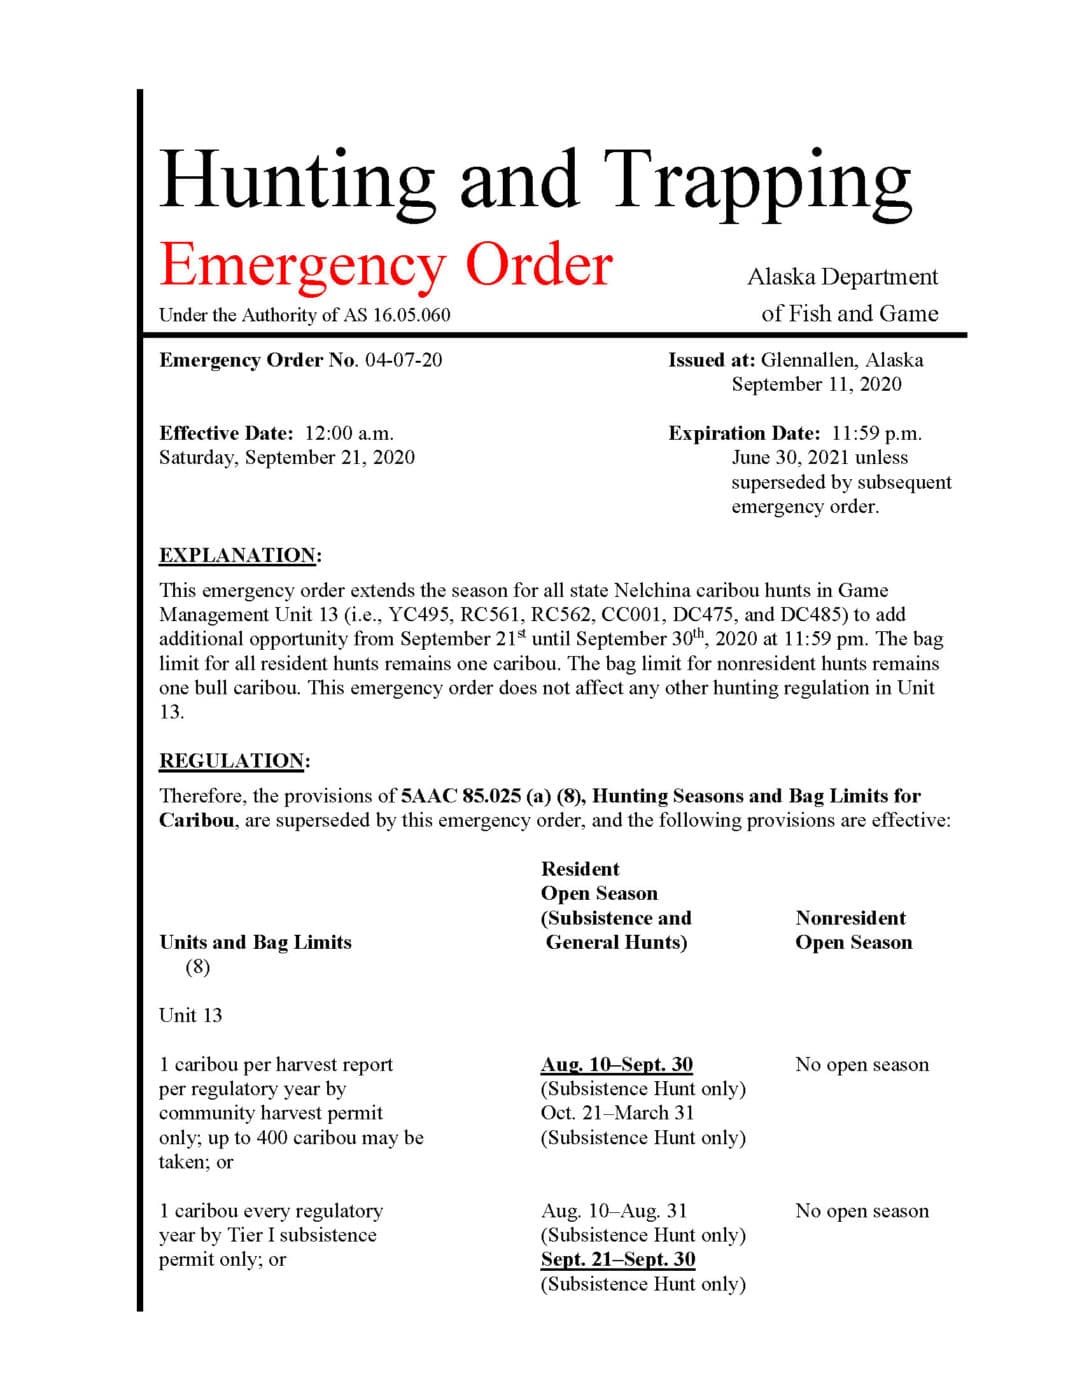 Hunting and Trapping Emergency Order